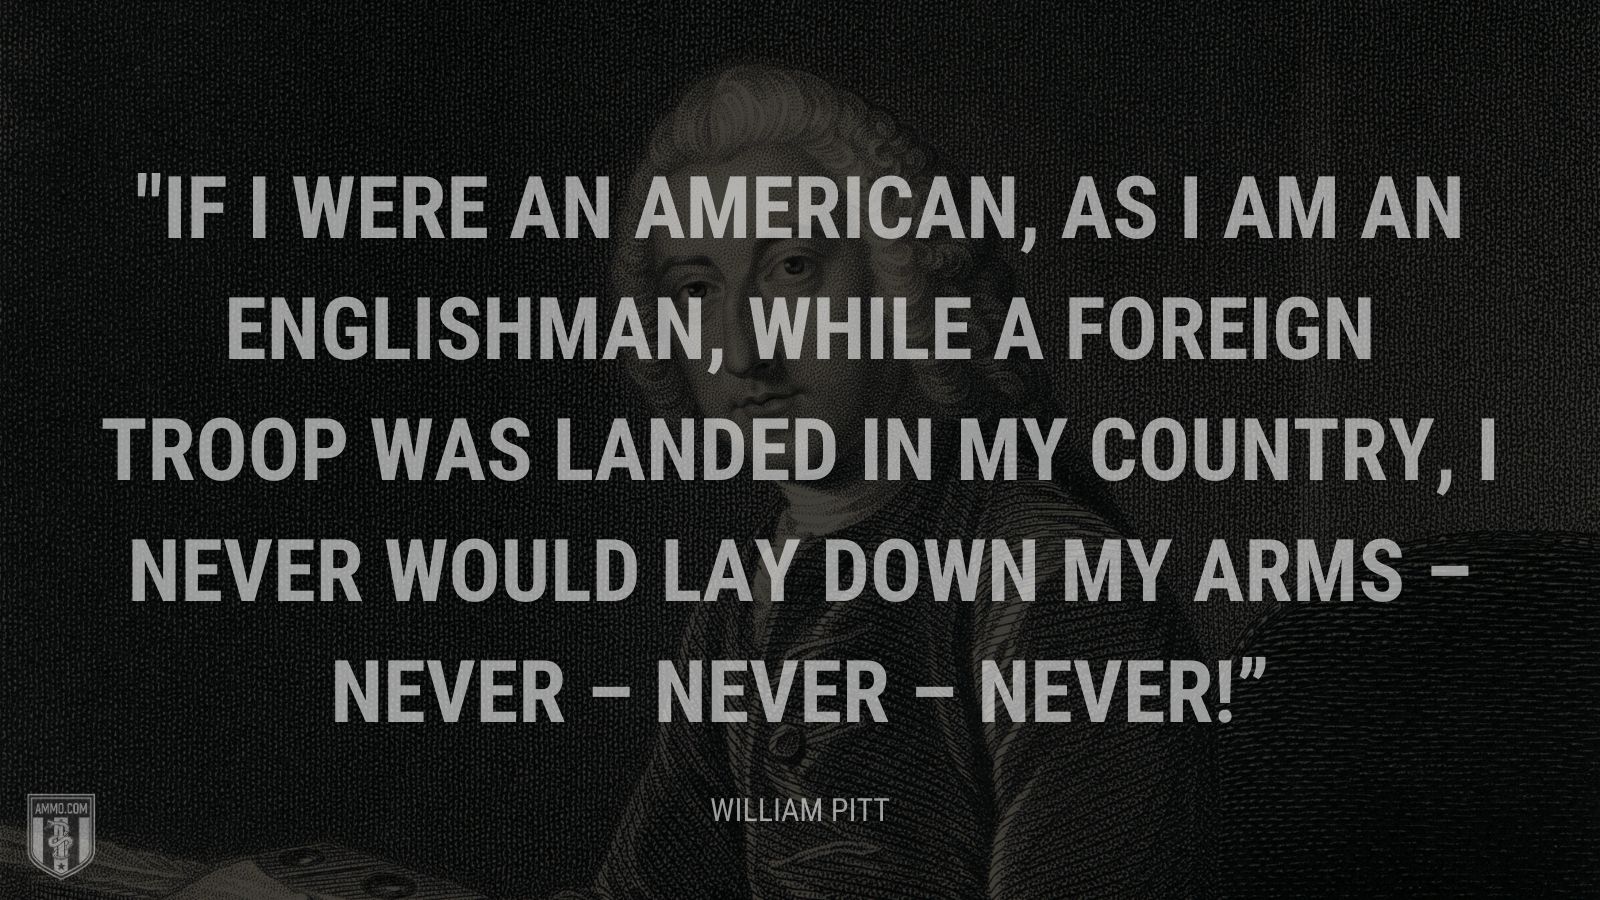 “If I were an American, as I am an Englishman, while a foreign troop was landed in my country, I never would lay down my arms – never – never – never!” - William Pitt